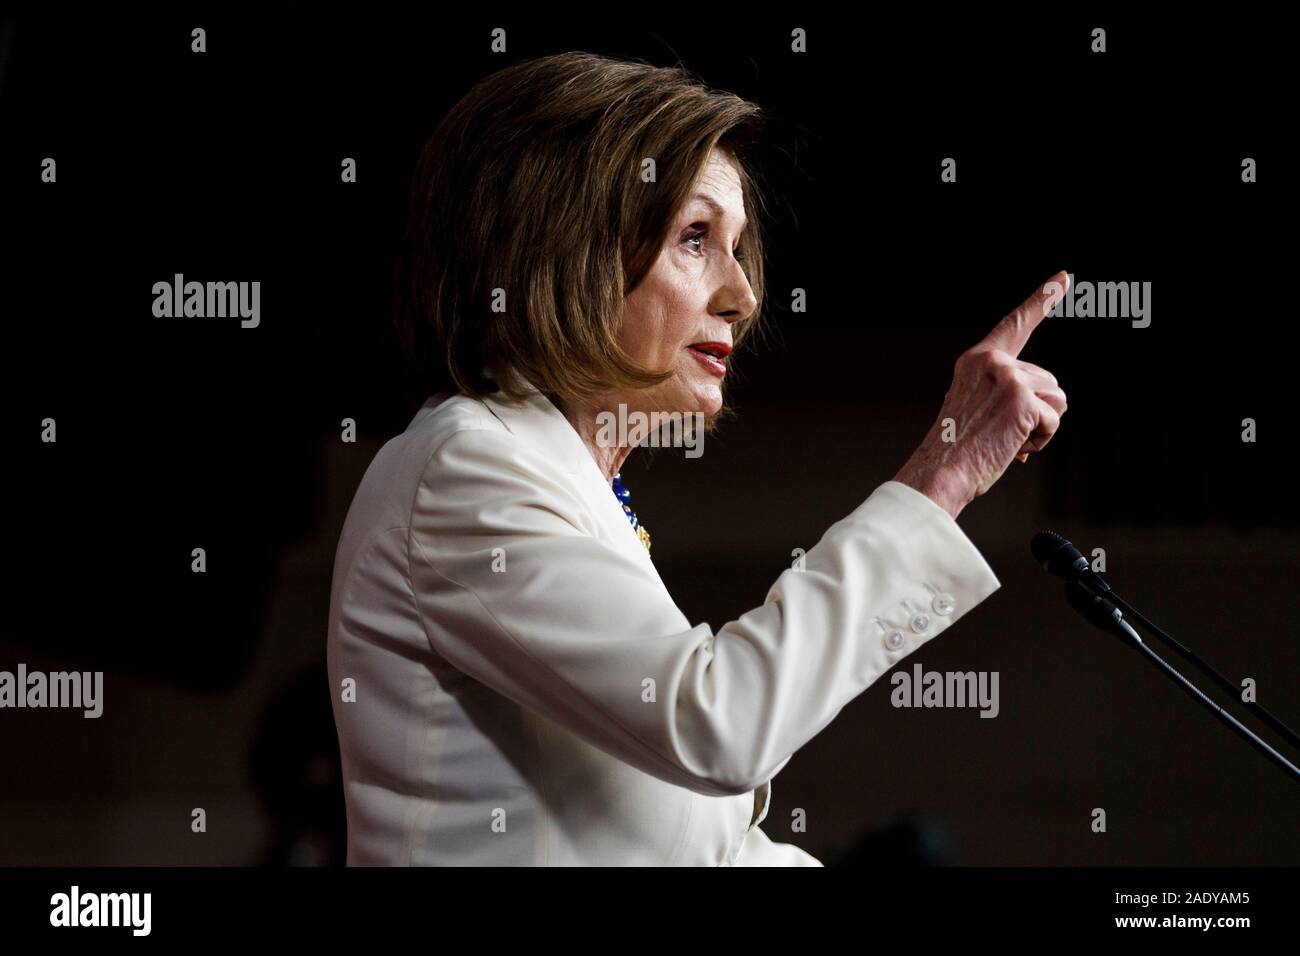 Washington, USA. 5th Dec, 2019. U.S. House Speaker Nancy Pelosi gestures during a press conference on Capitol Hill in Washington, DC, the United States, on Dec. 5, 2019. Nancy Pelosi has greenlighted the drafting of articles of impeachment against President Donald Trump, as the White House braces for a Senate trial. Credit: Ting Shen/Xinhua/Alamy Live News Stock Photo